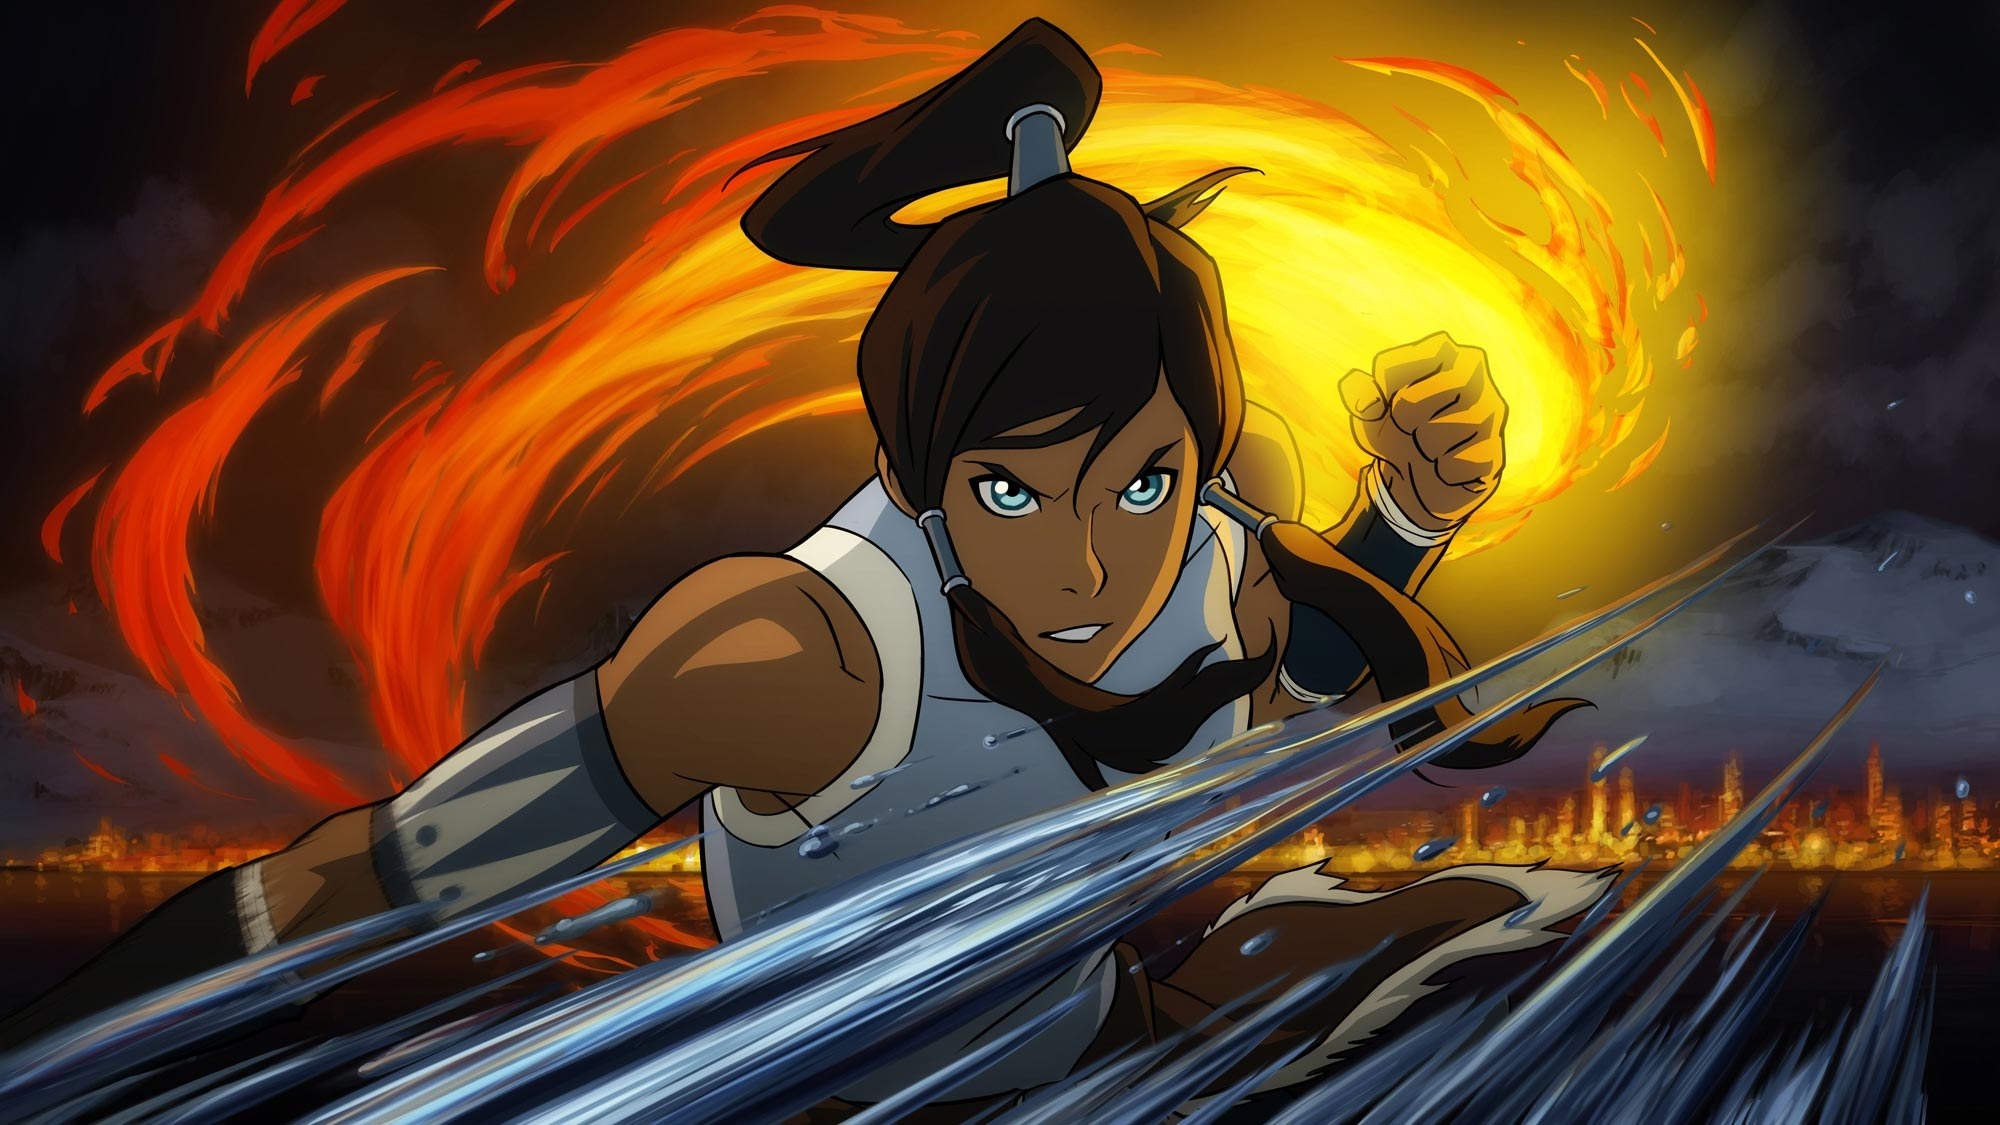 Korra using her avatar powers to control the elements